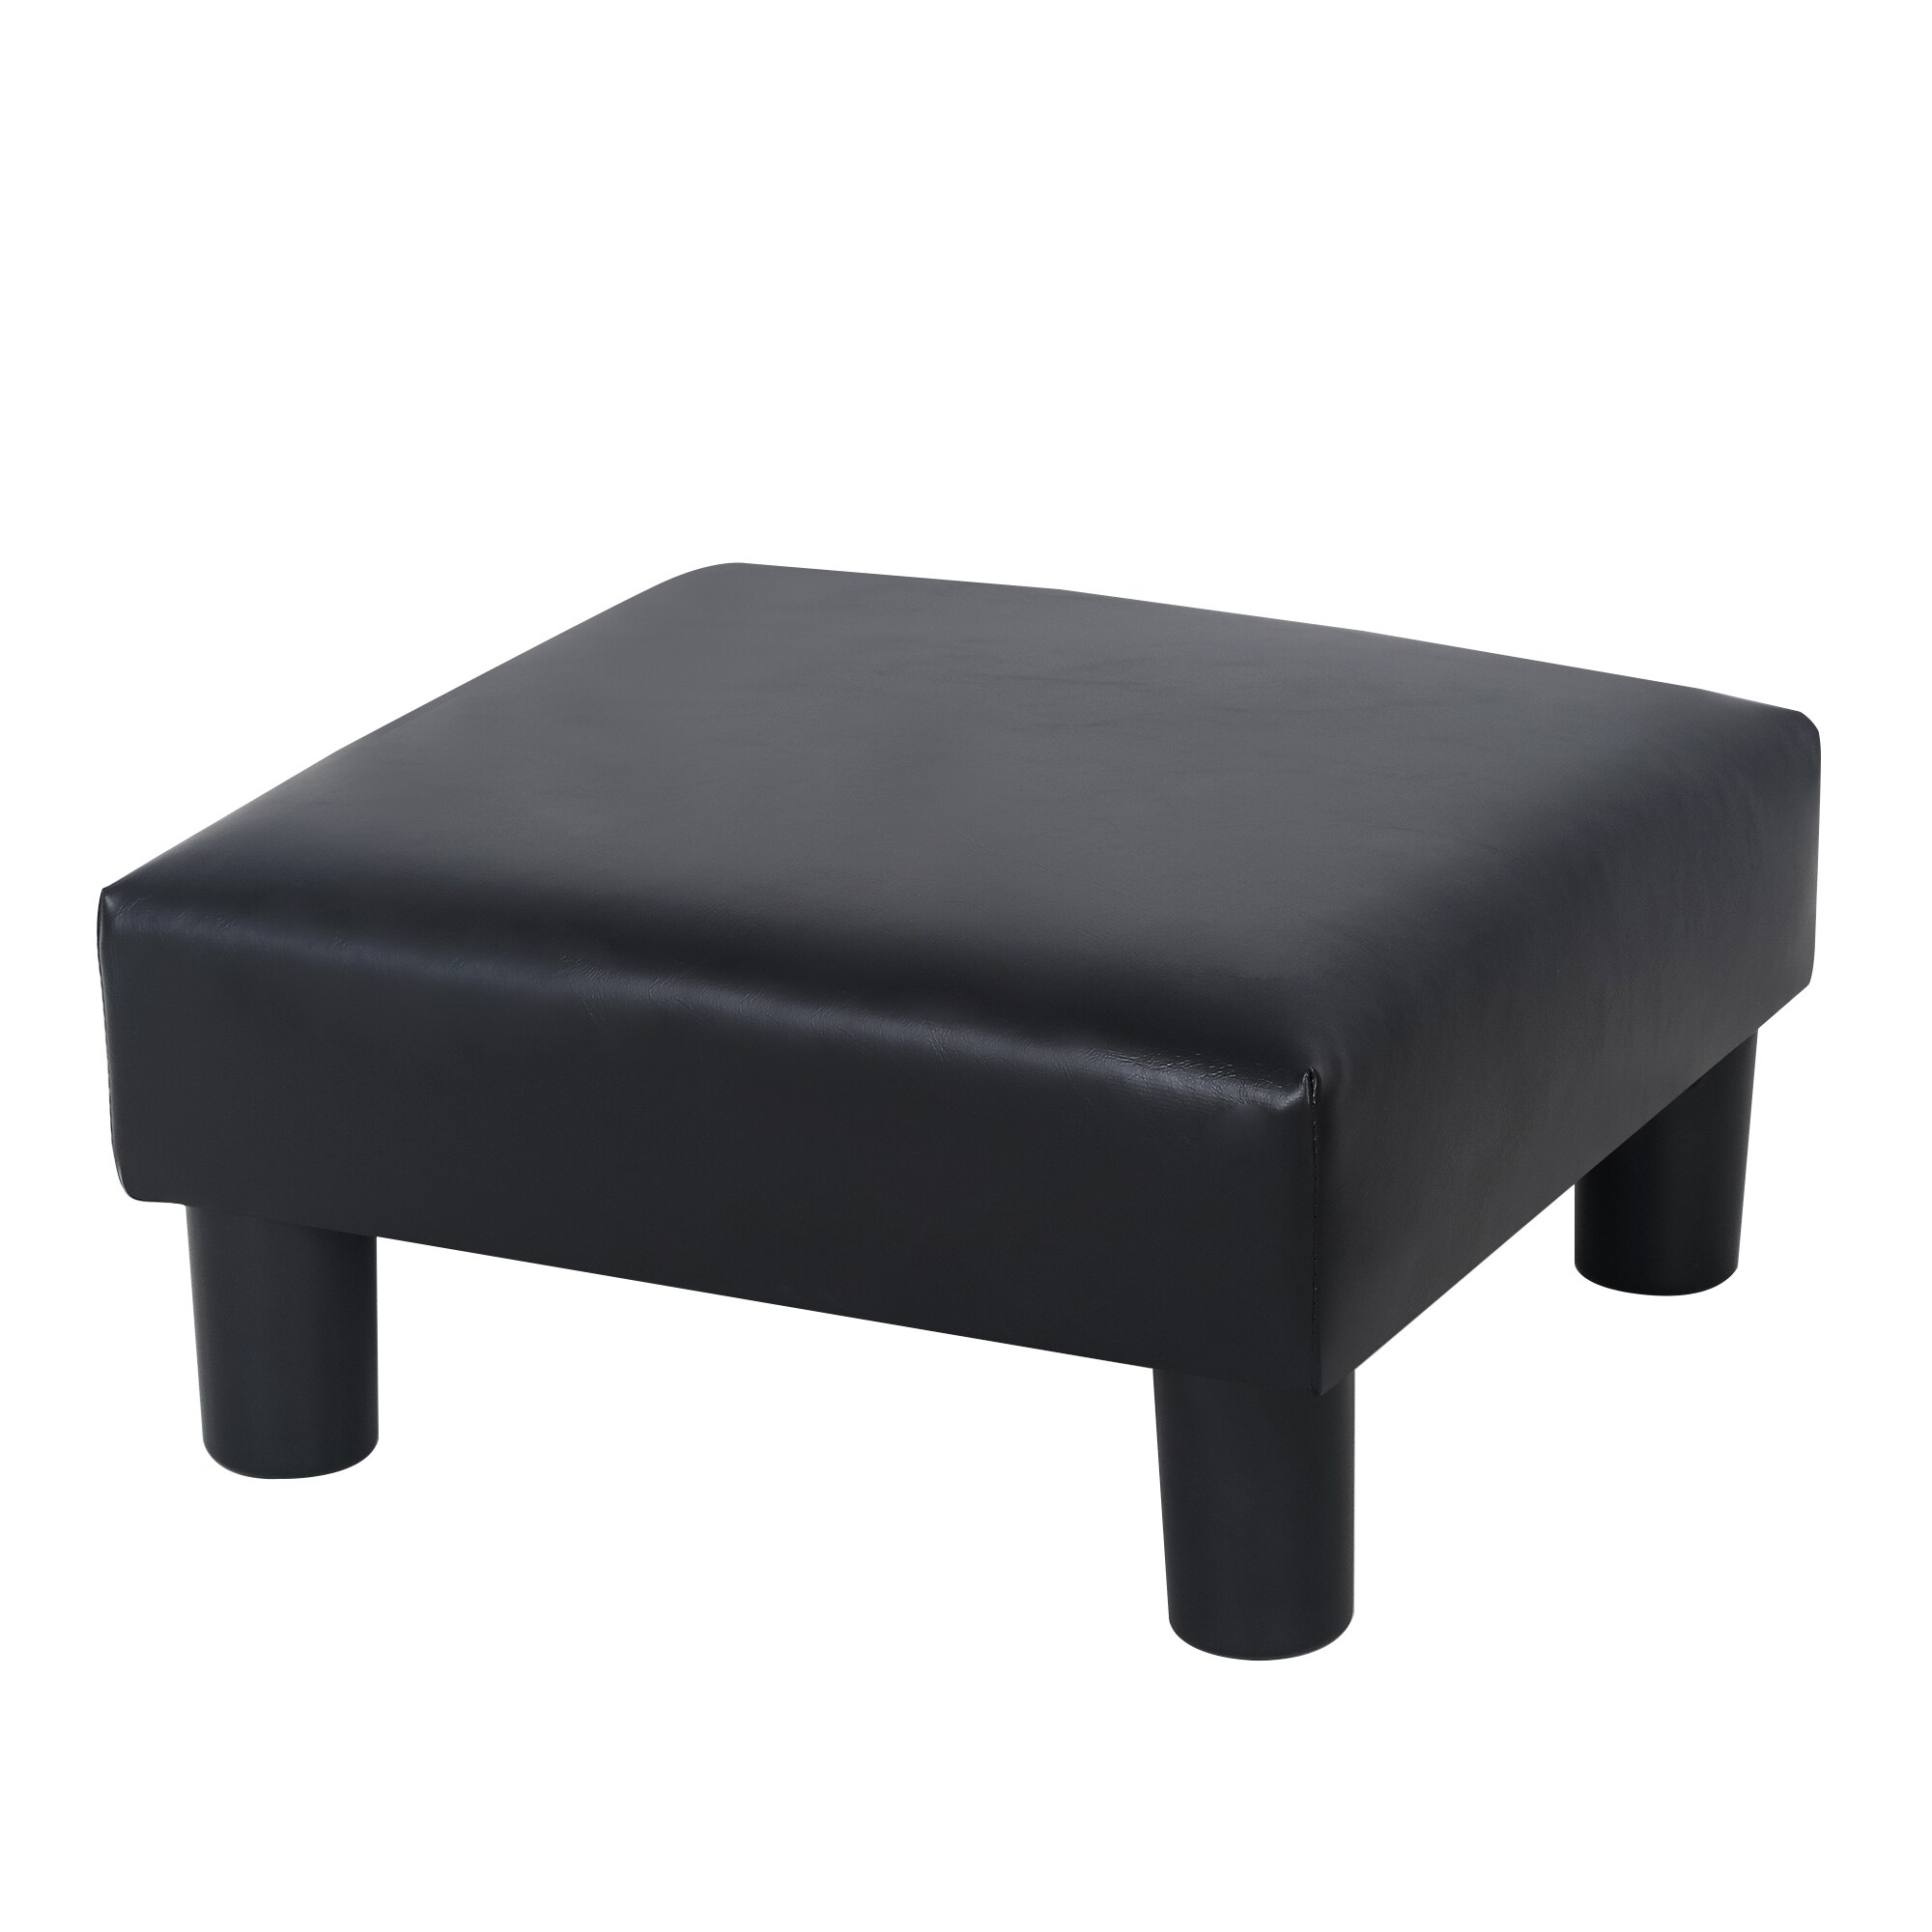 https://ak1.ostkcdn.com/images/products/is/images/direct/983ad456cf4d1320be0376796cd481ba434c98c1/Adeco-15%27%27-Small-Ottoman-Upholstered-Foot-Rest.jpg